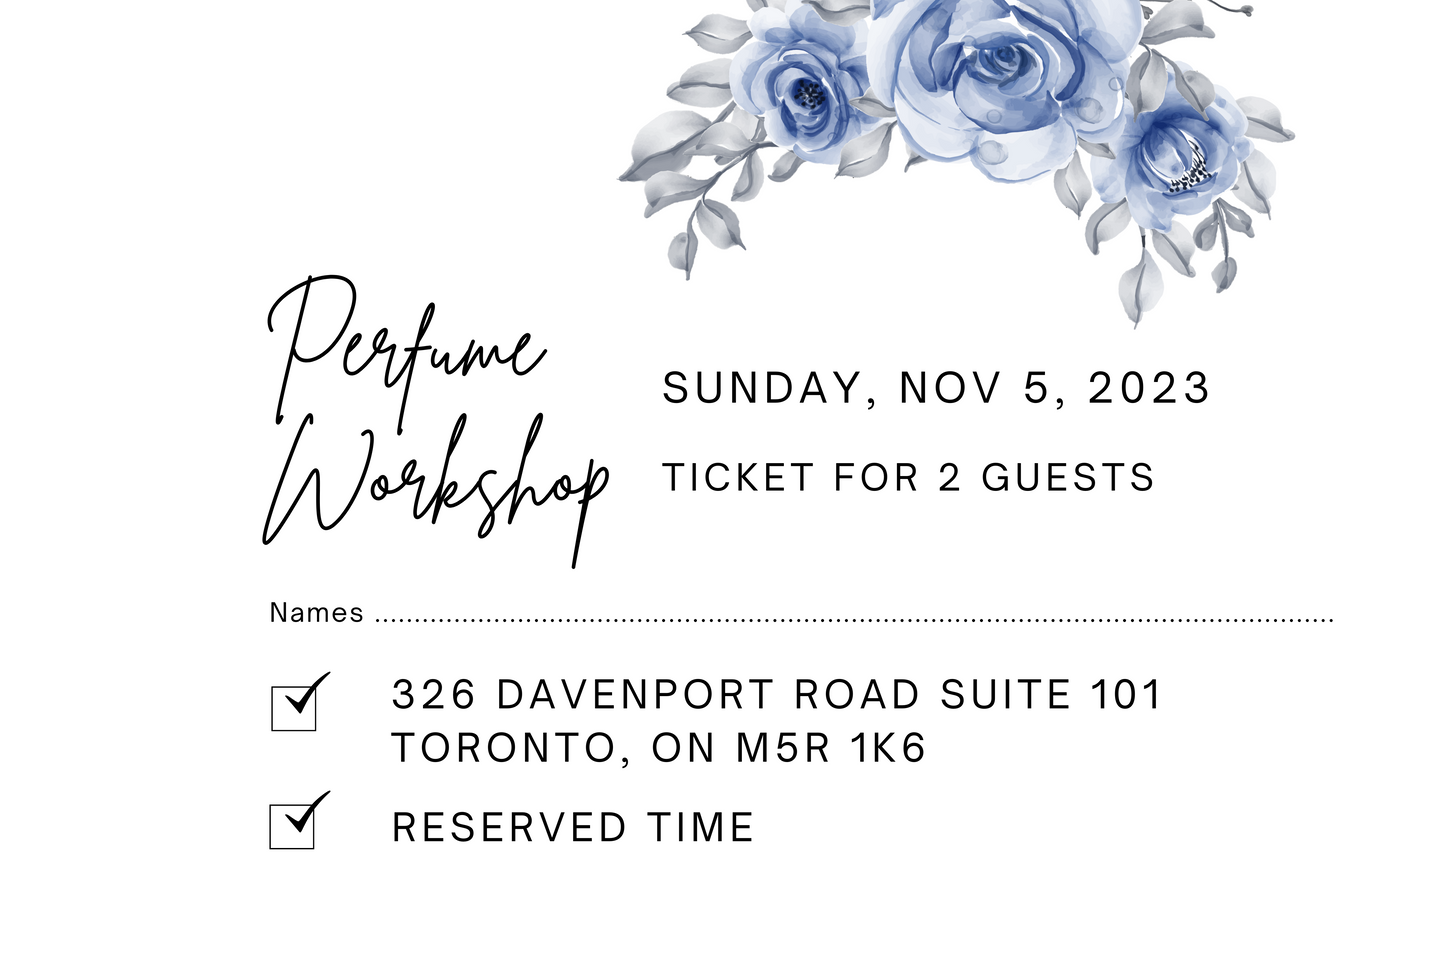 December 10th, 2023 Perfume/Cologne Workshop Session For 2 Guests